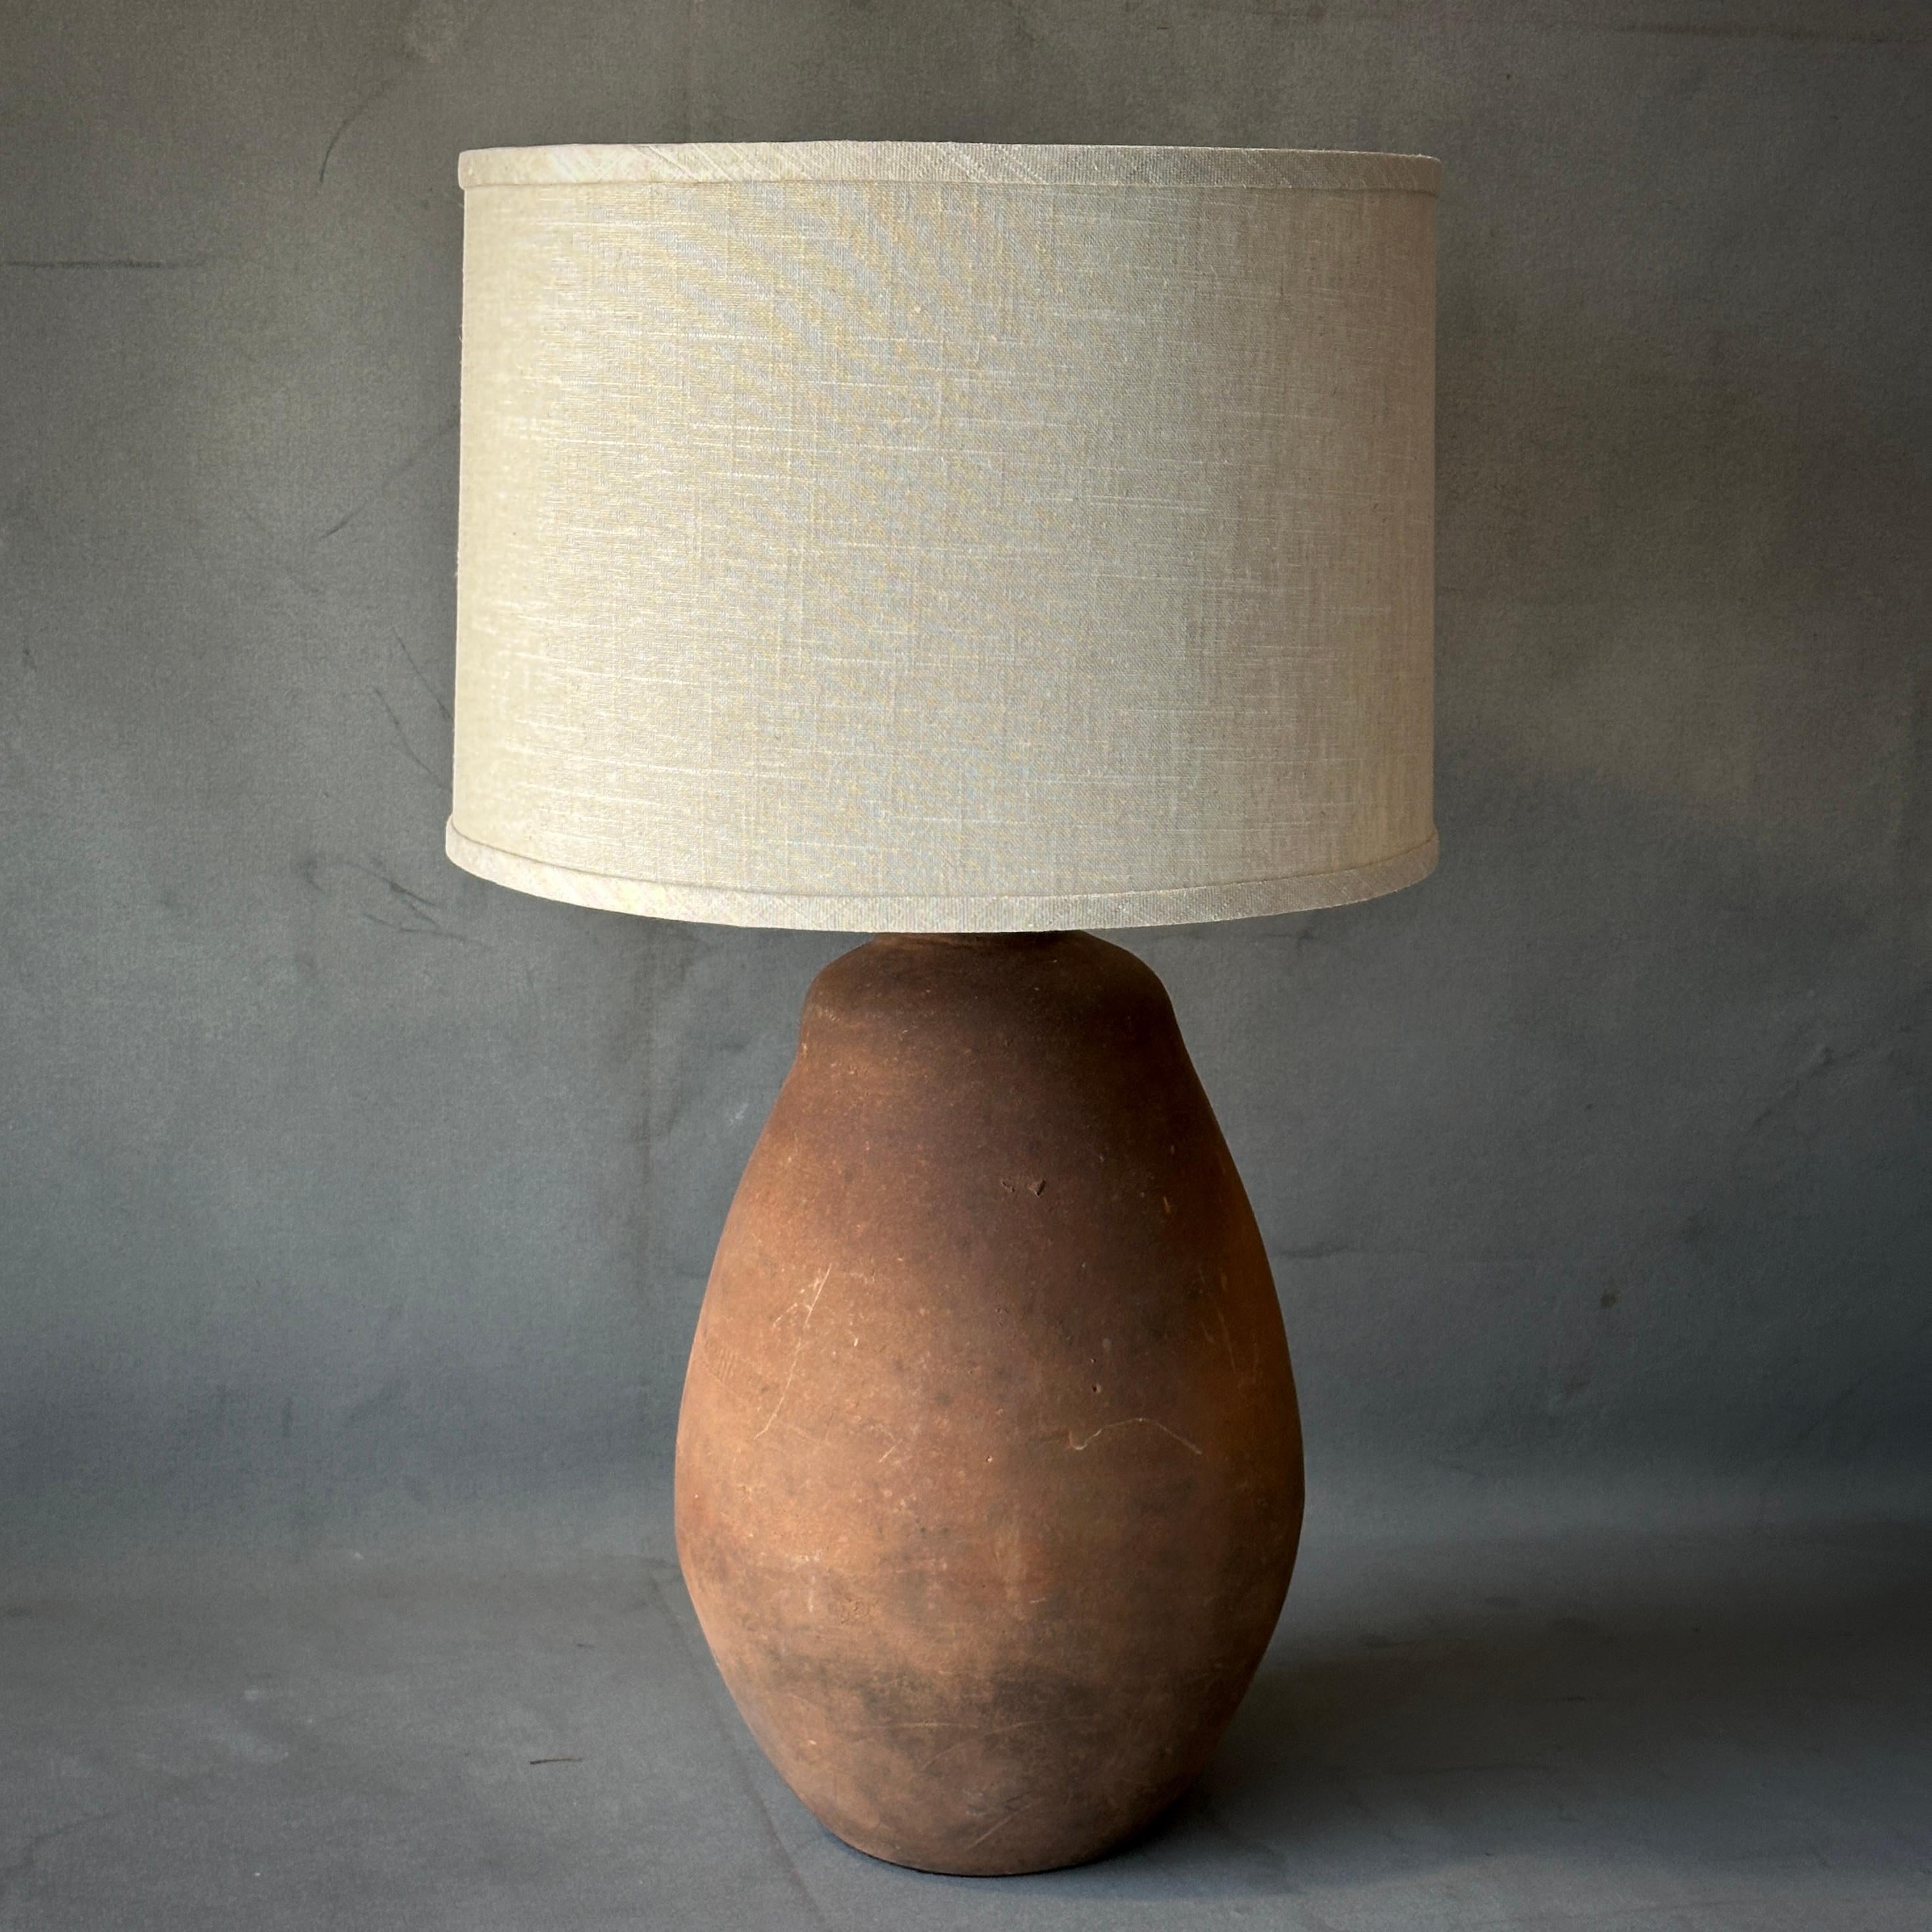 Beatriz is a sensuous, slightly irregular shape terra-cotta vessel as lamp with earthy, handmade appeal.

Discovered at an abandoned potters studio in the Jalisco region of Mexico.

Beatriz
Mexico, 1995